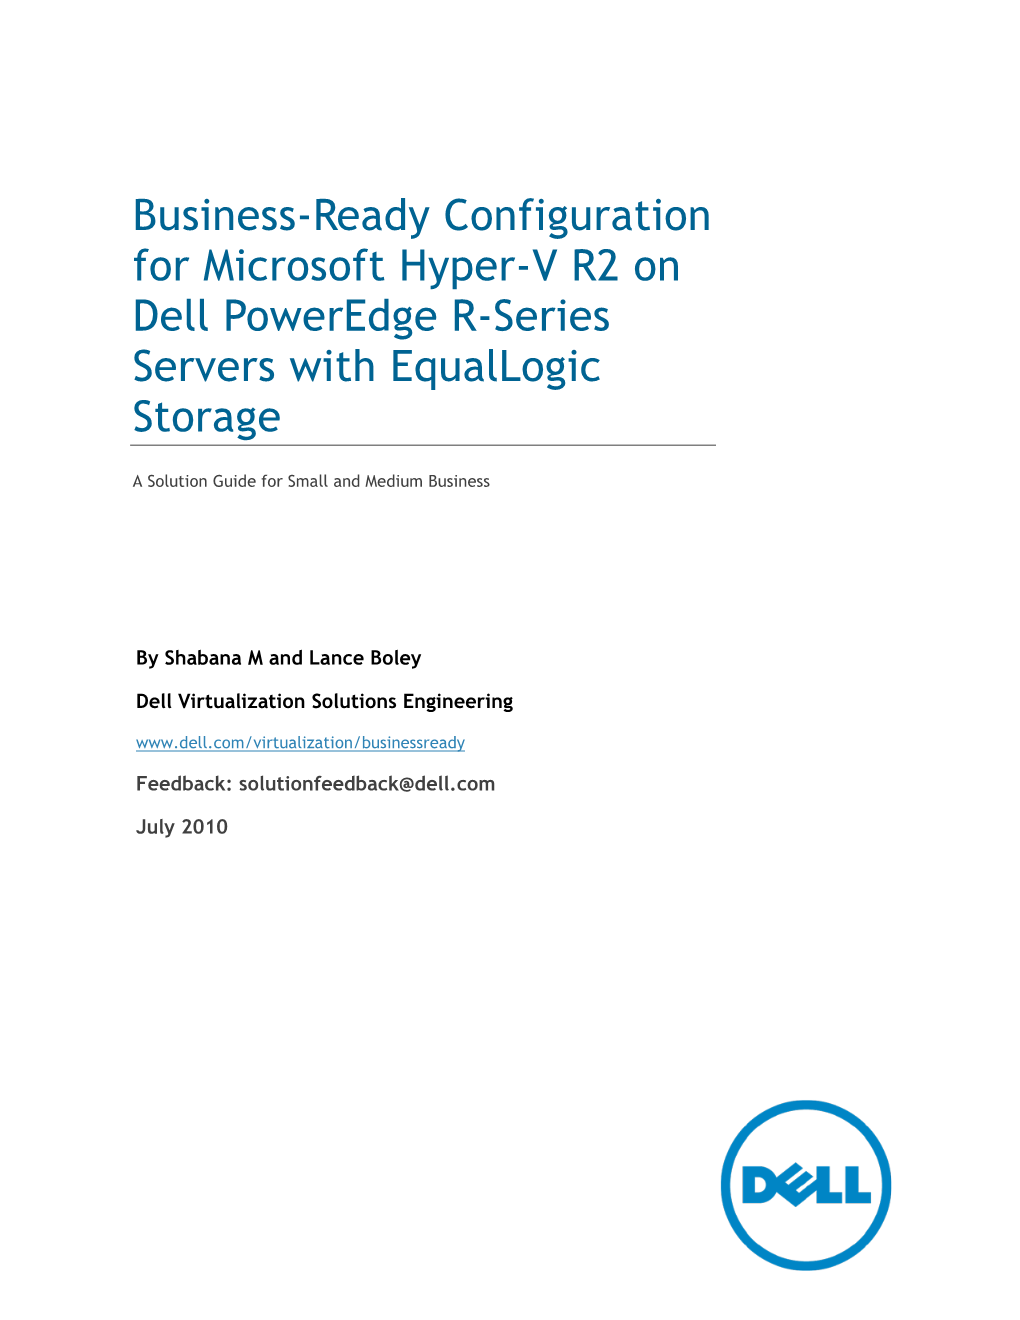 Business-Ready Configuration for Microsoft Hyper-V R2 on Dell